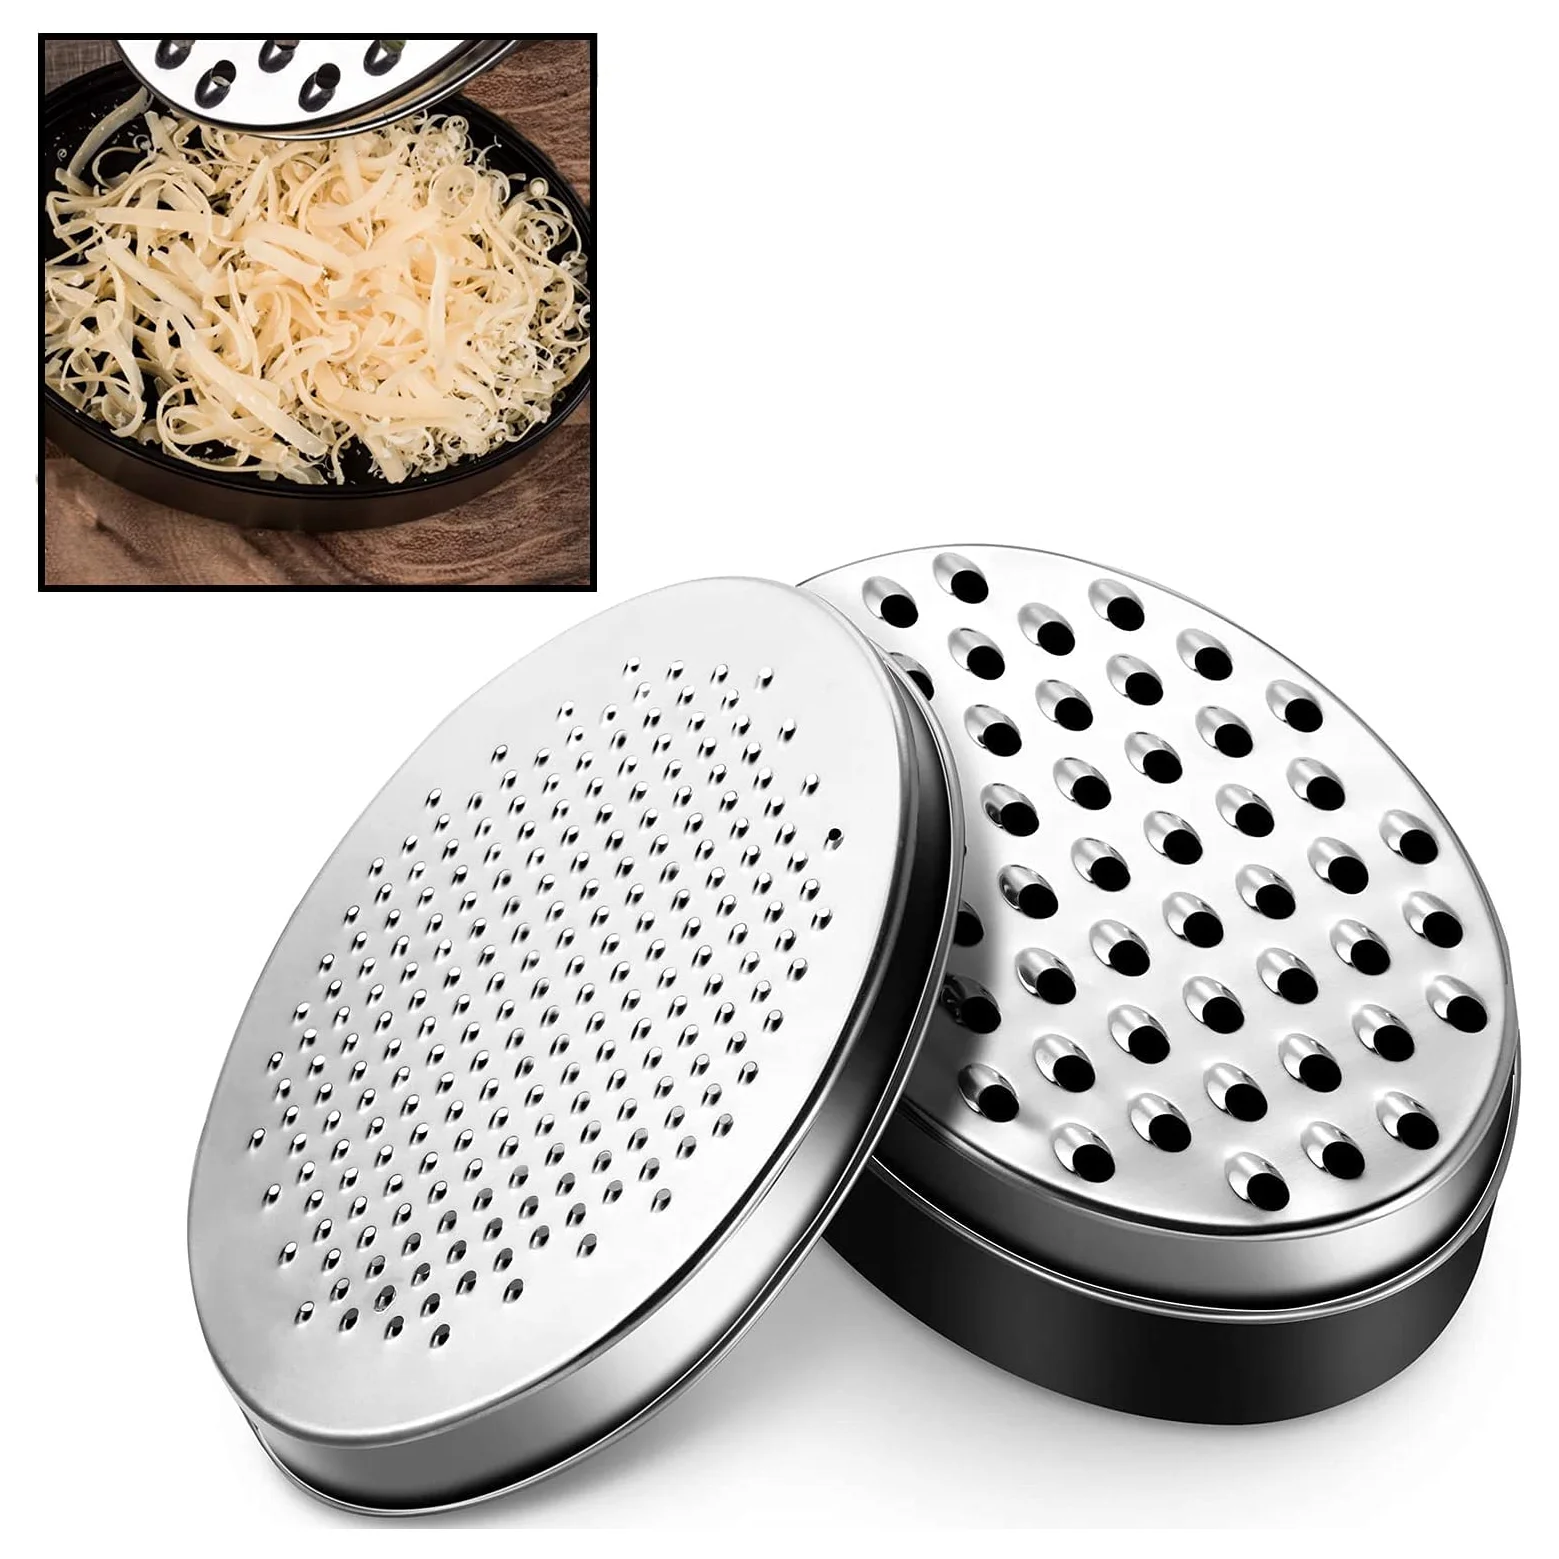 2 IN 1 Cheese Veggies Box Grater for Hard Parmesan and Soft Cheddar Cheese Grater with Food Storage Container (1600500512826)